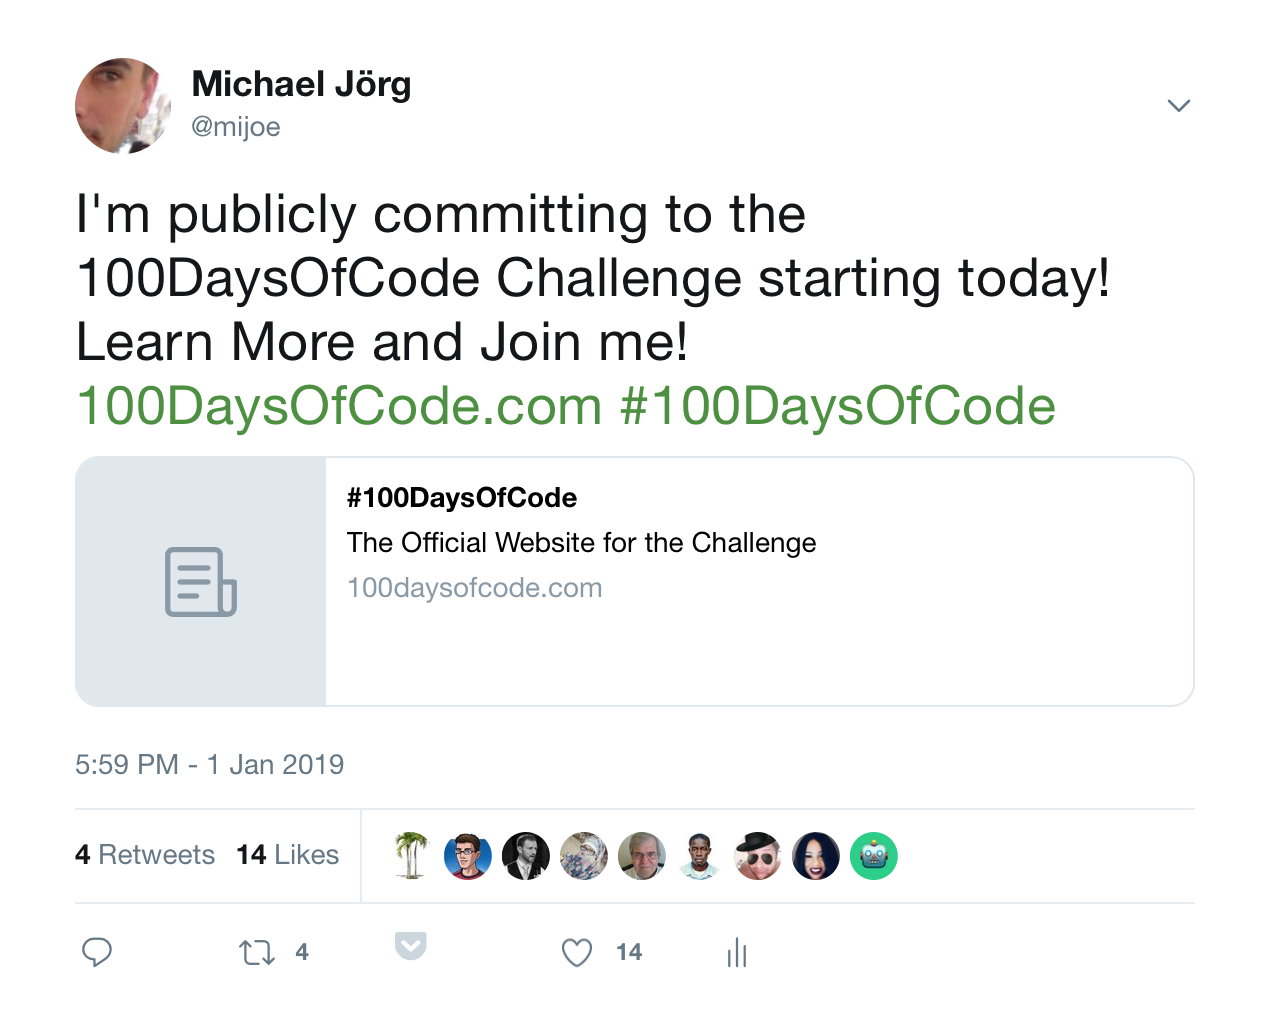 Commitment to 100DaysOfCode Challenge